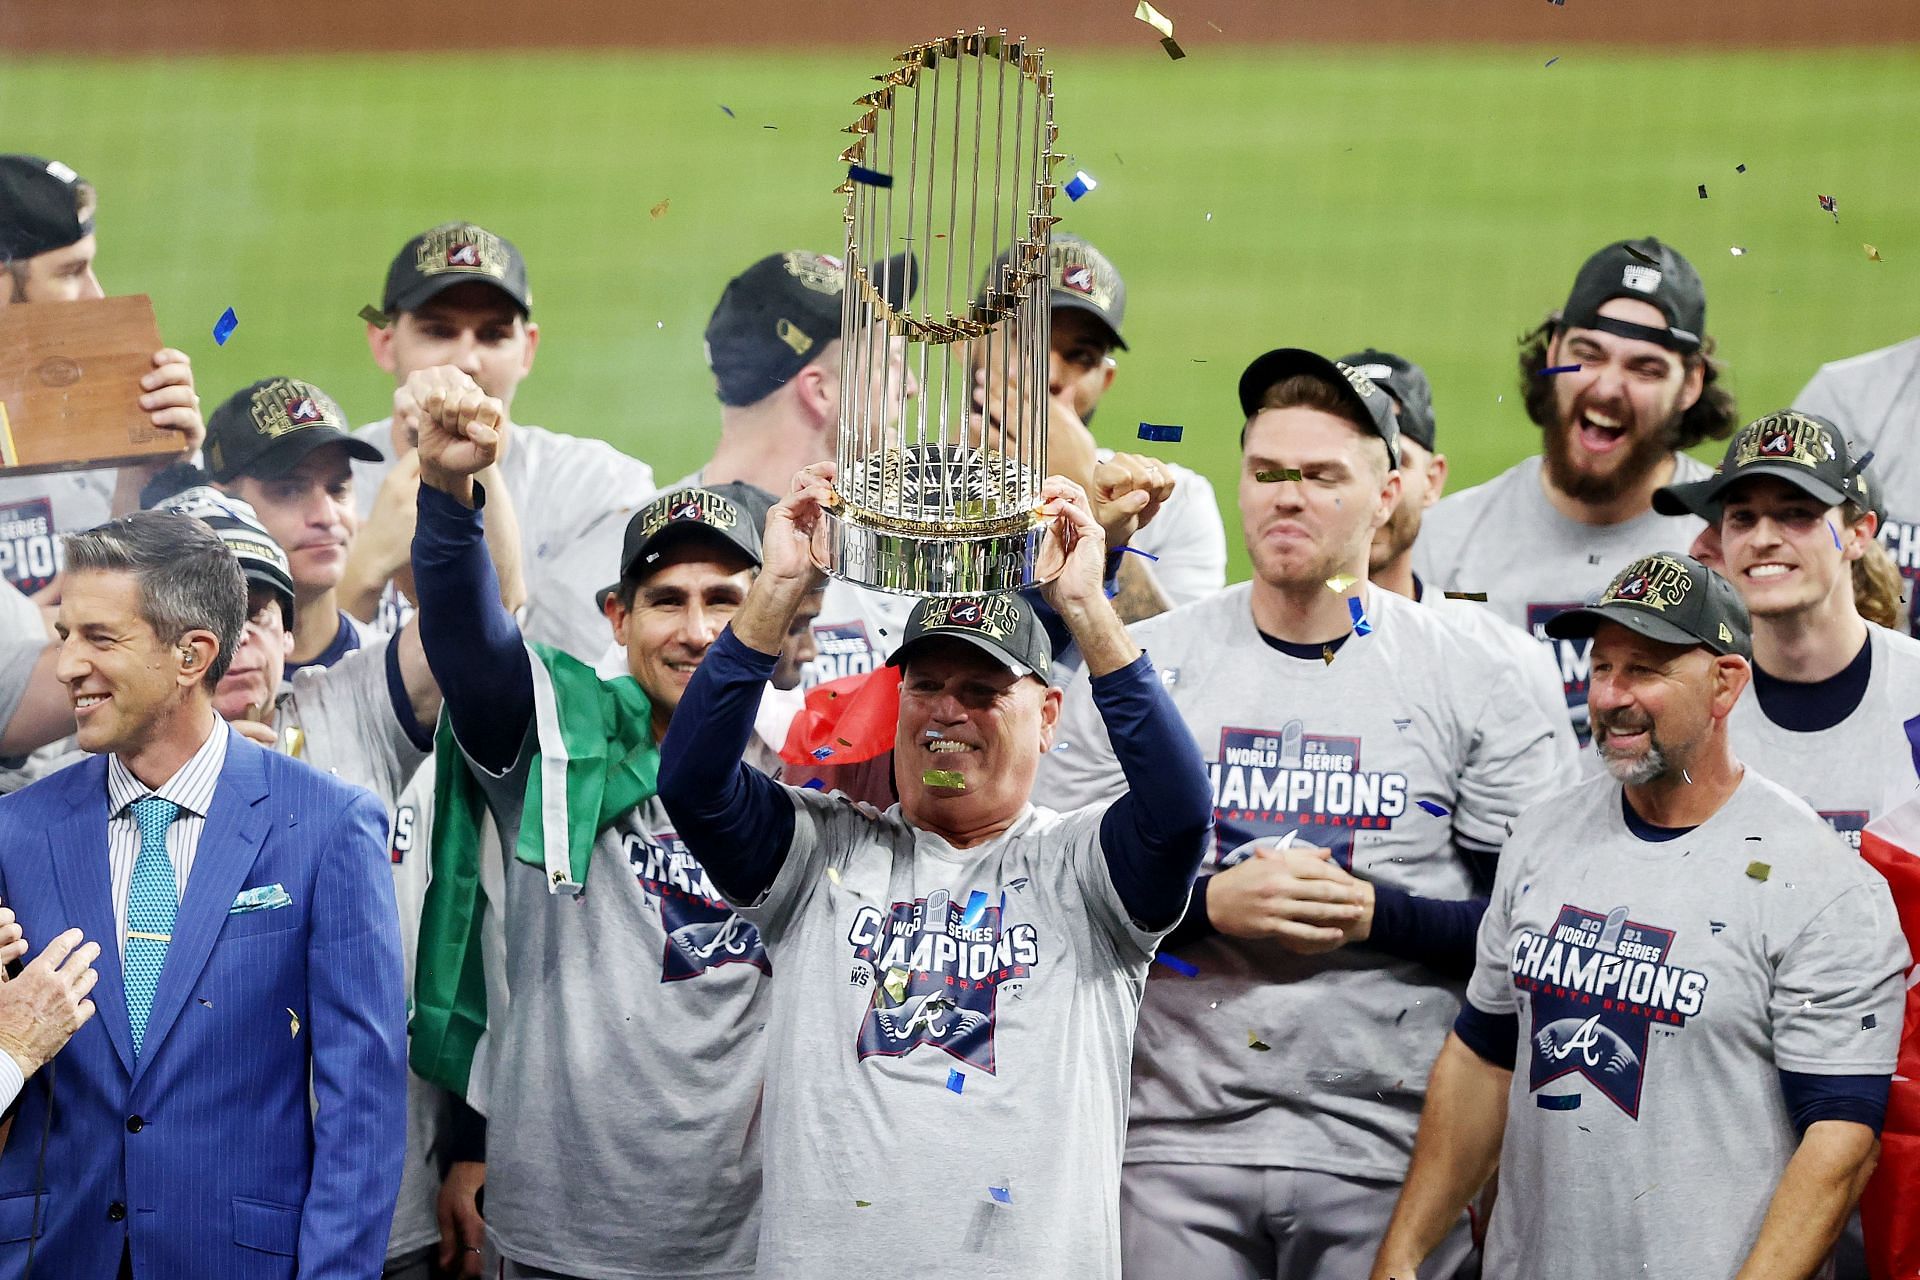 The Atlanta Braves clinched the World Series title in 2021 against the Houston Astros in Game 6.